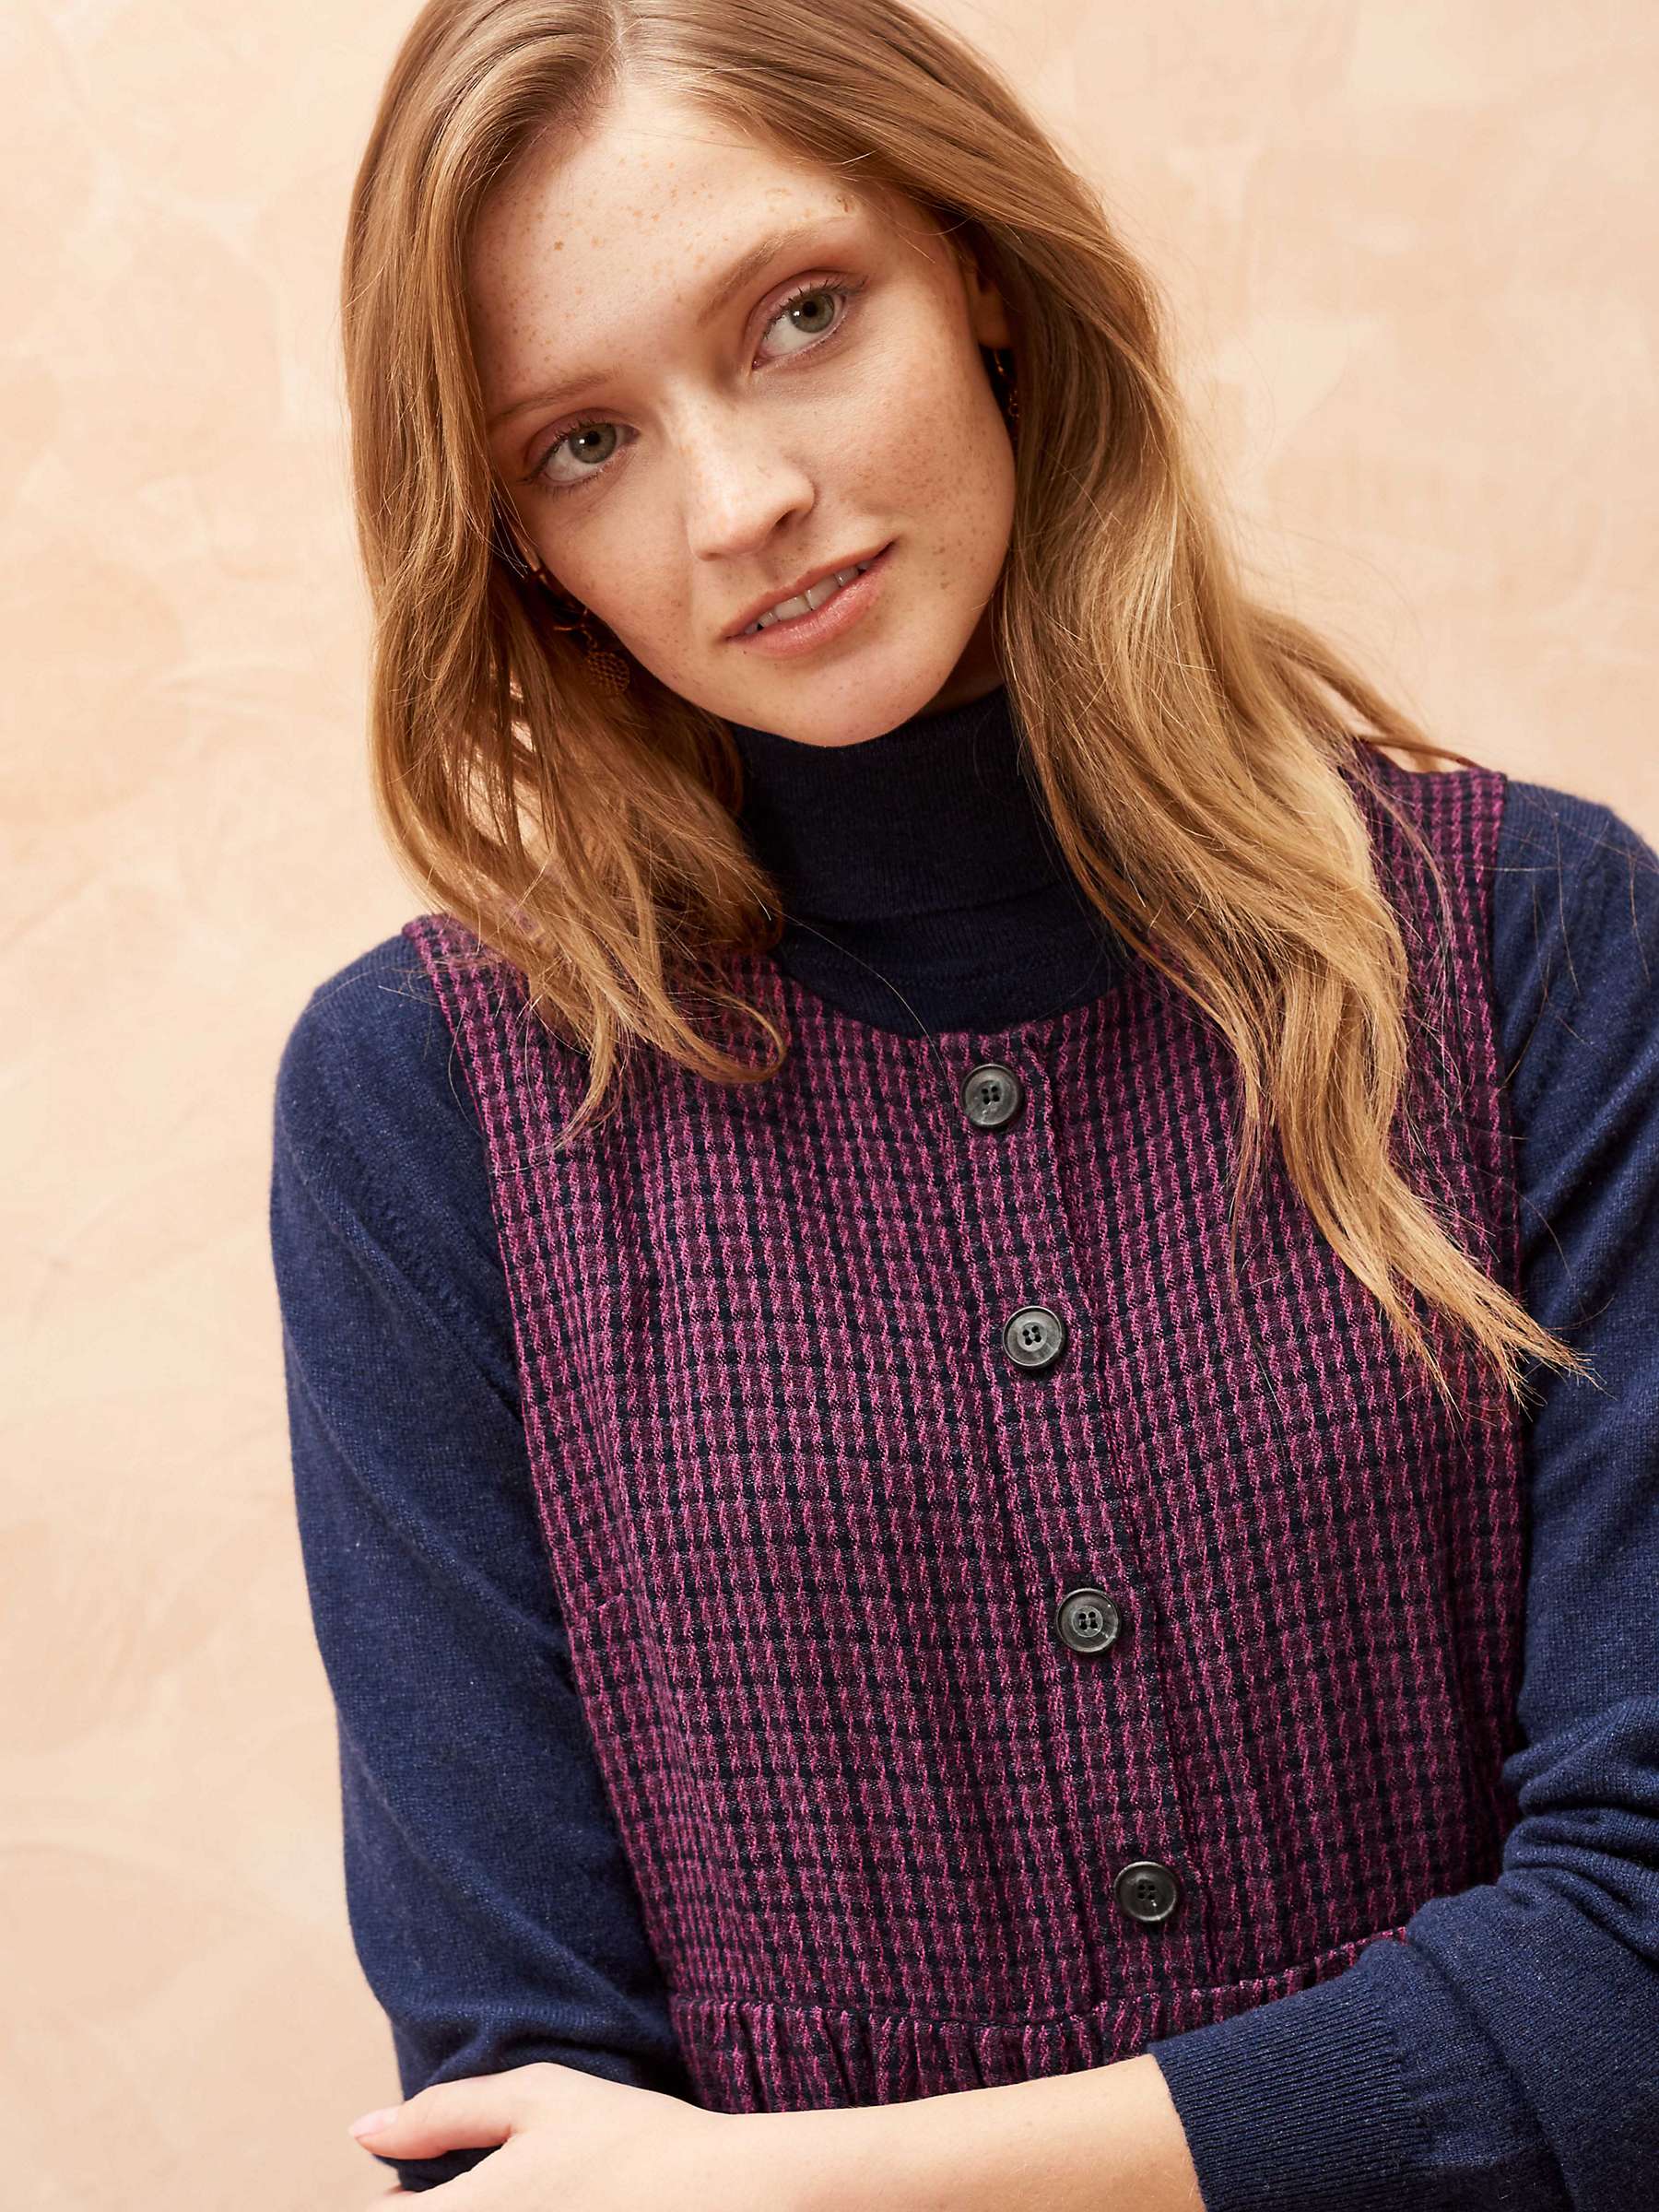 Buy Brora Wool Blend Textured Weave Checked Pinafore Dress, Midnight & Rose Online at johnlewis.com